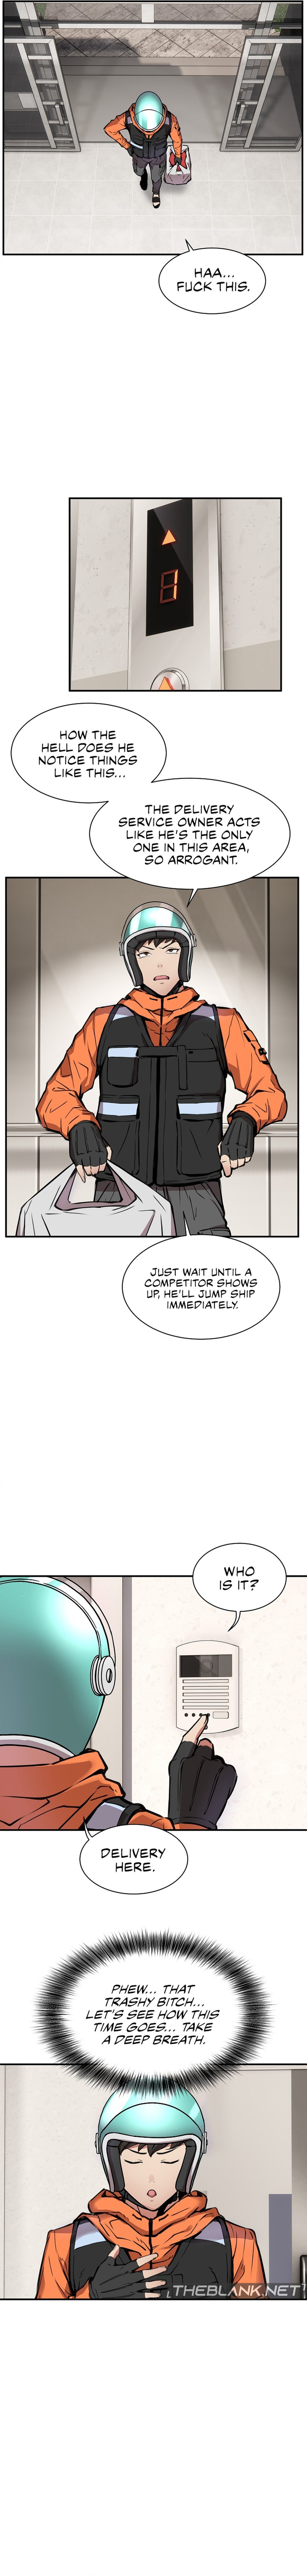 Driver in the New City - Chapter 1 Page 19